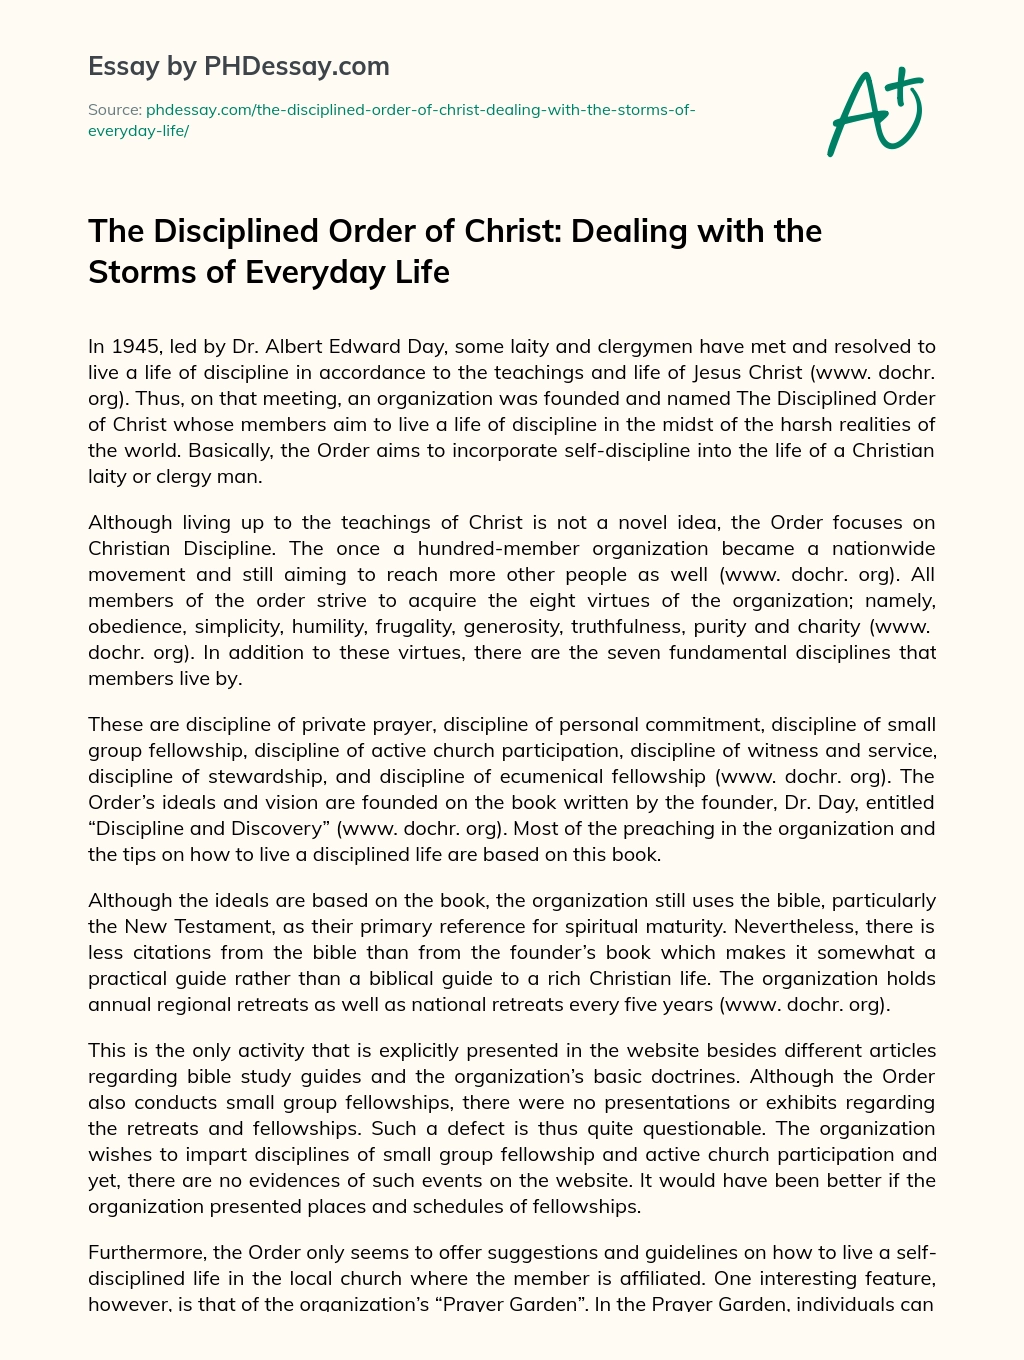 The Disciplined Order of Christ: Dealing with the Storms of Everyday Life essay